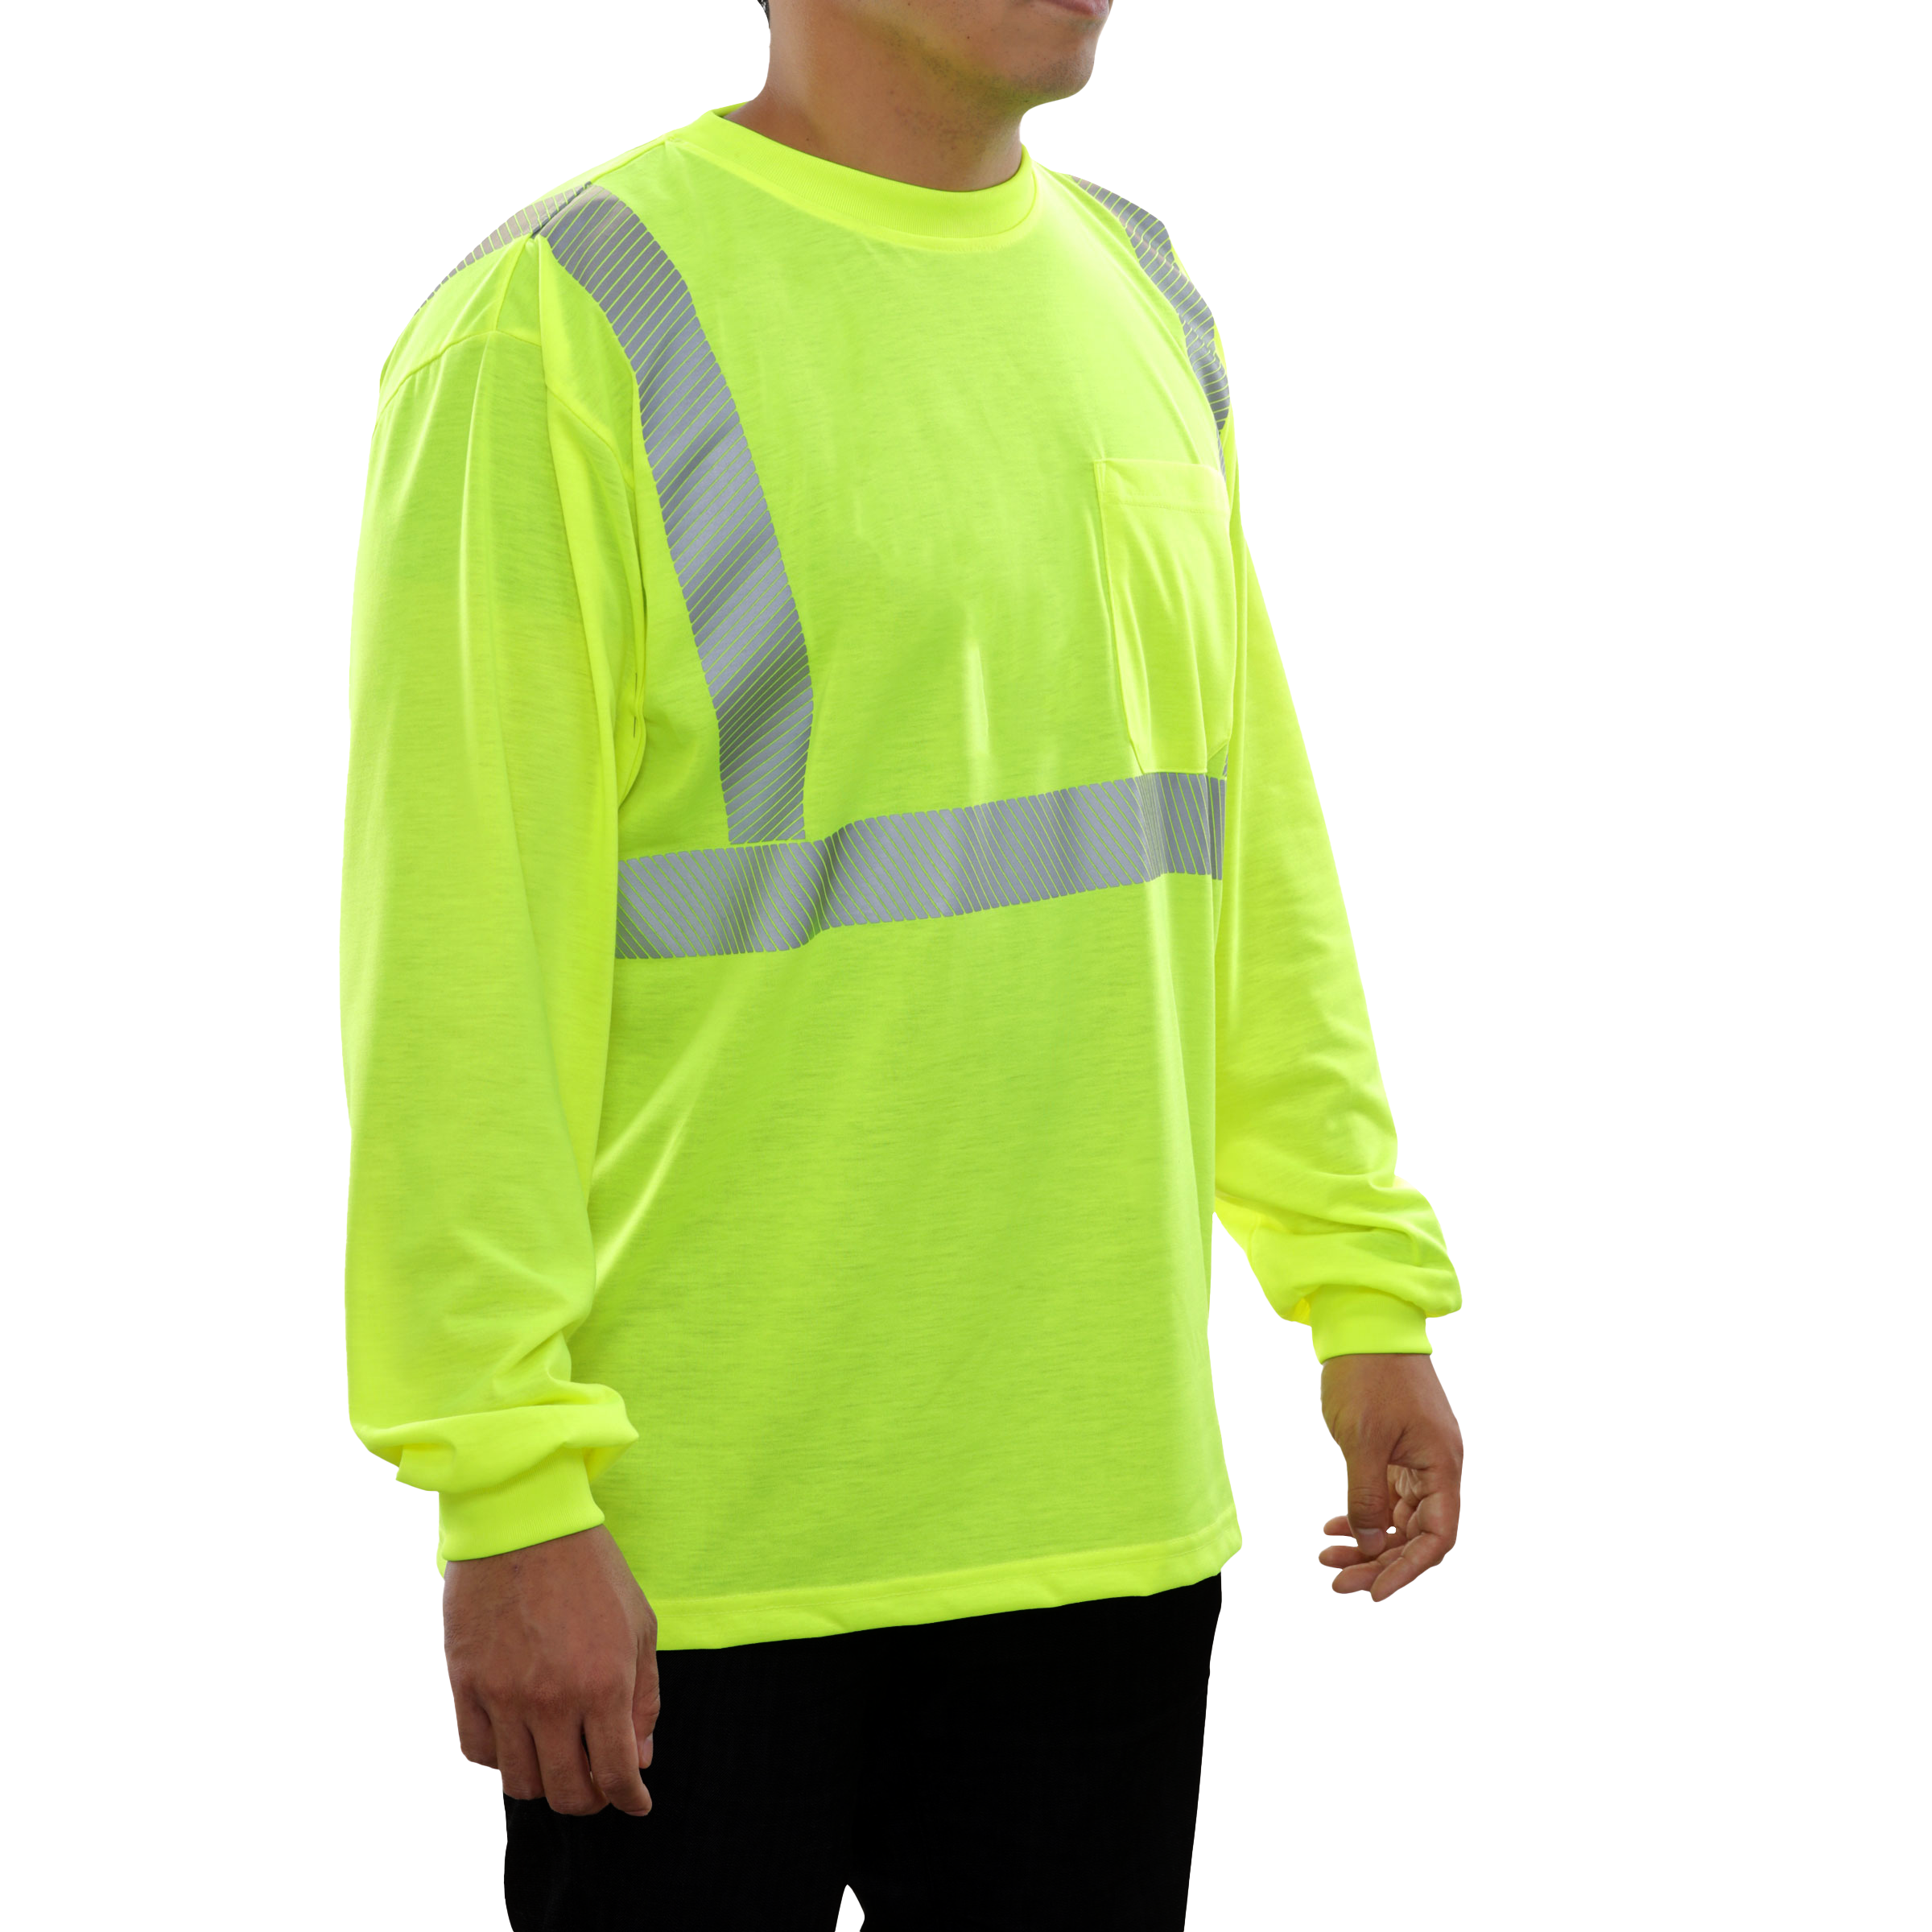 Reflective Apparel High Visibility Pocket Shirt Long Sleeve Lime Jersey Comfort Trim by 3M